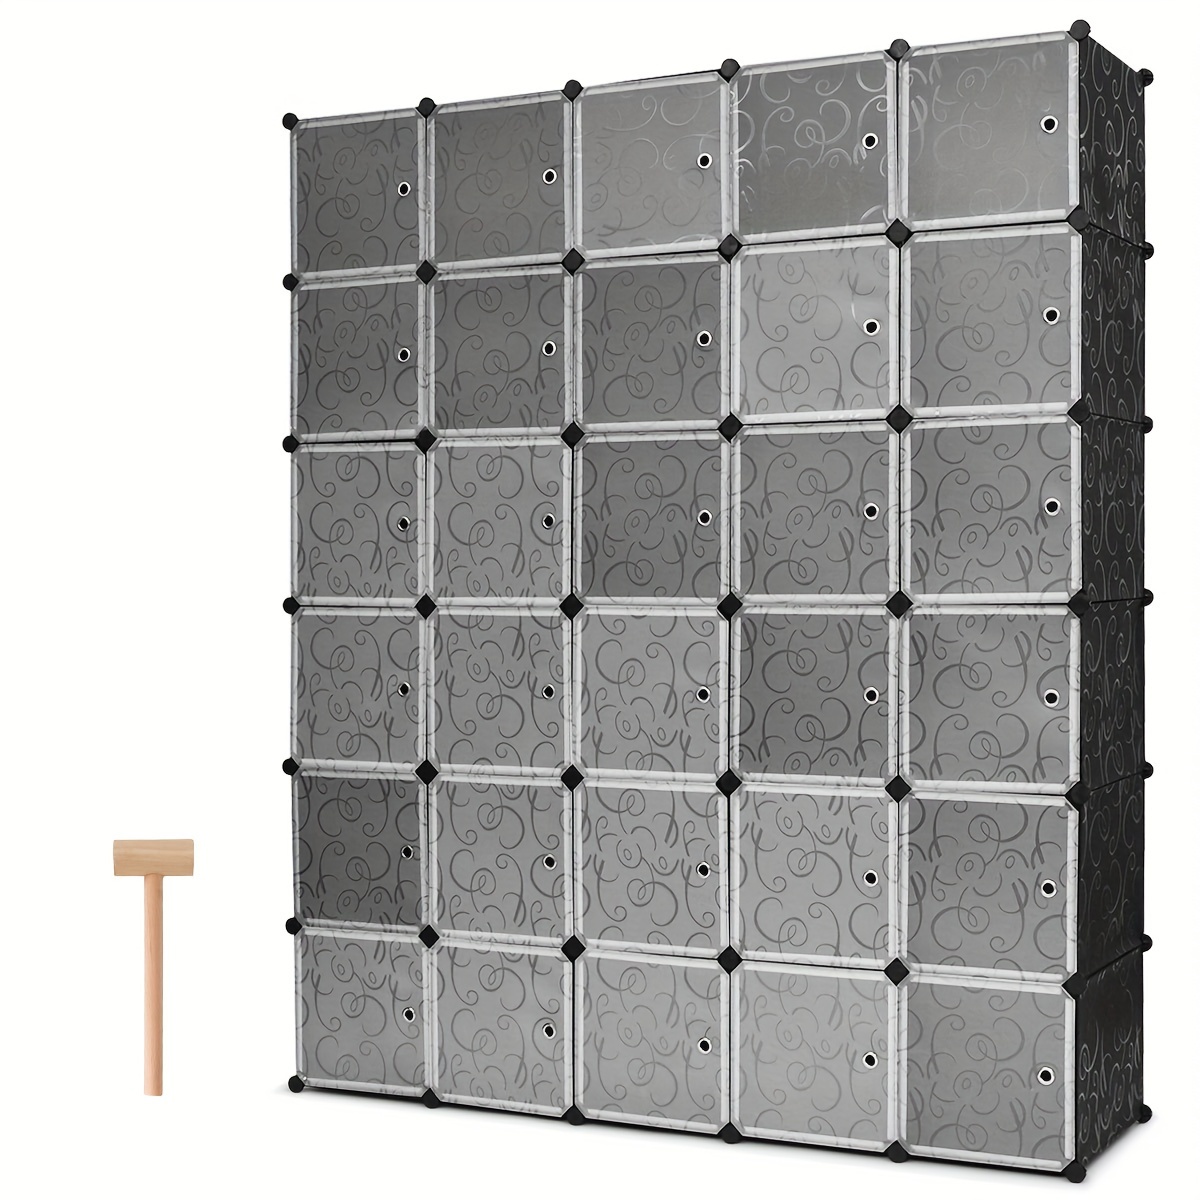 

30pcs Cube Portable Closet Storage Organizer, Clothes Wardrobe Cabinet With Doors, Clothes Storage Organizer For Bedroom